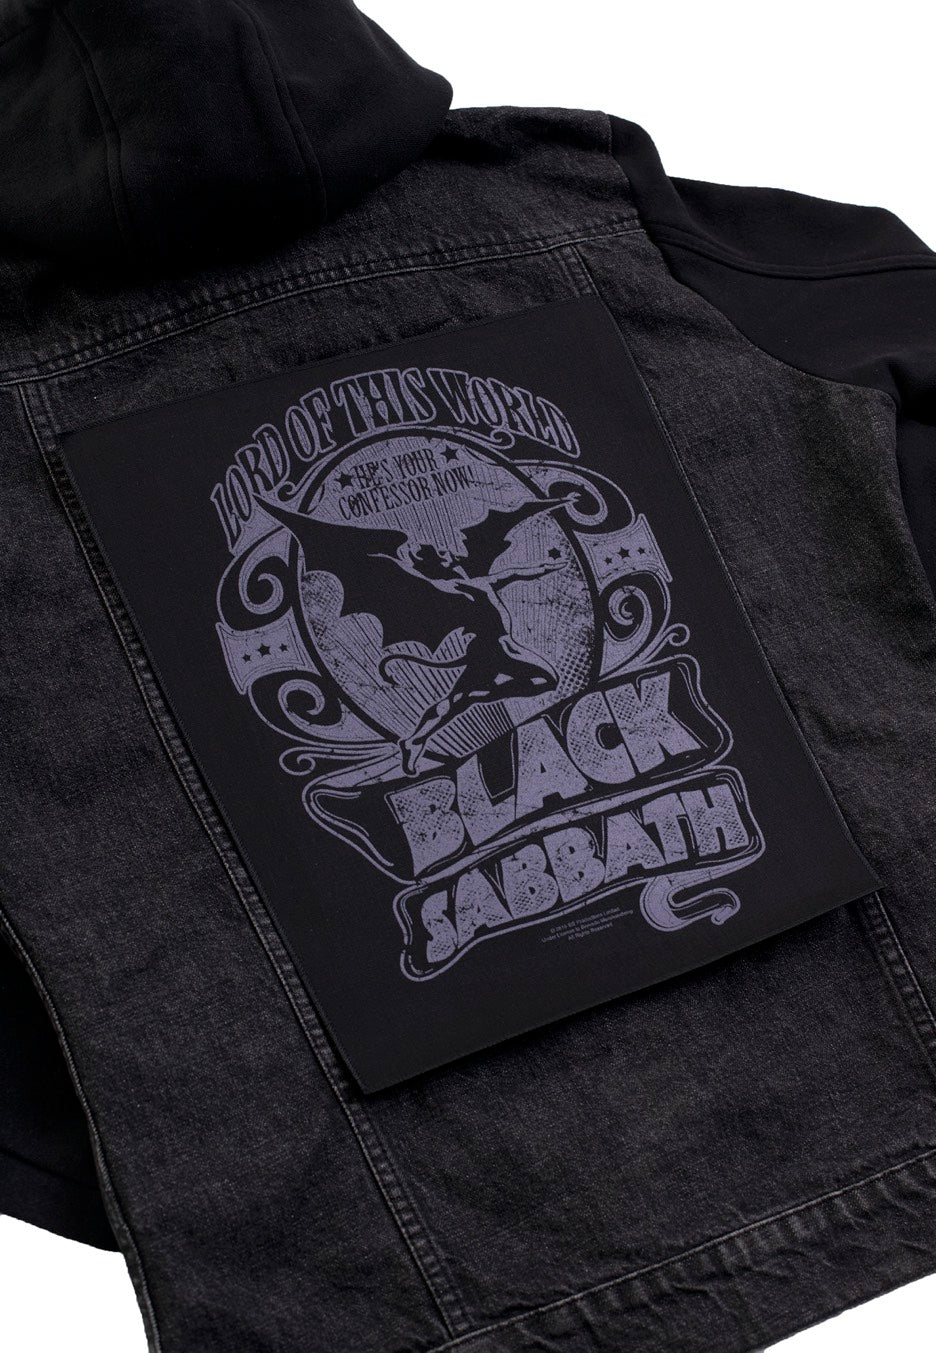 Black Sabbath - Lord Of This World - Backpatch | Neutral-Image